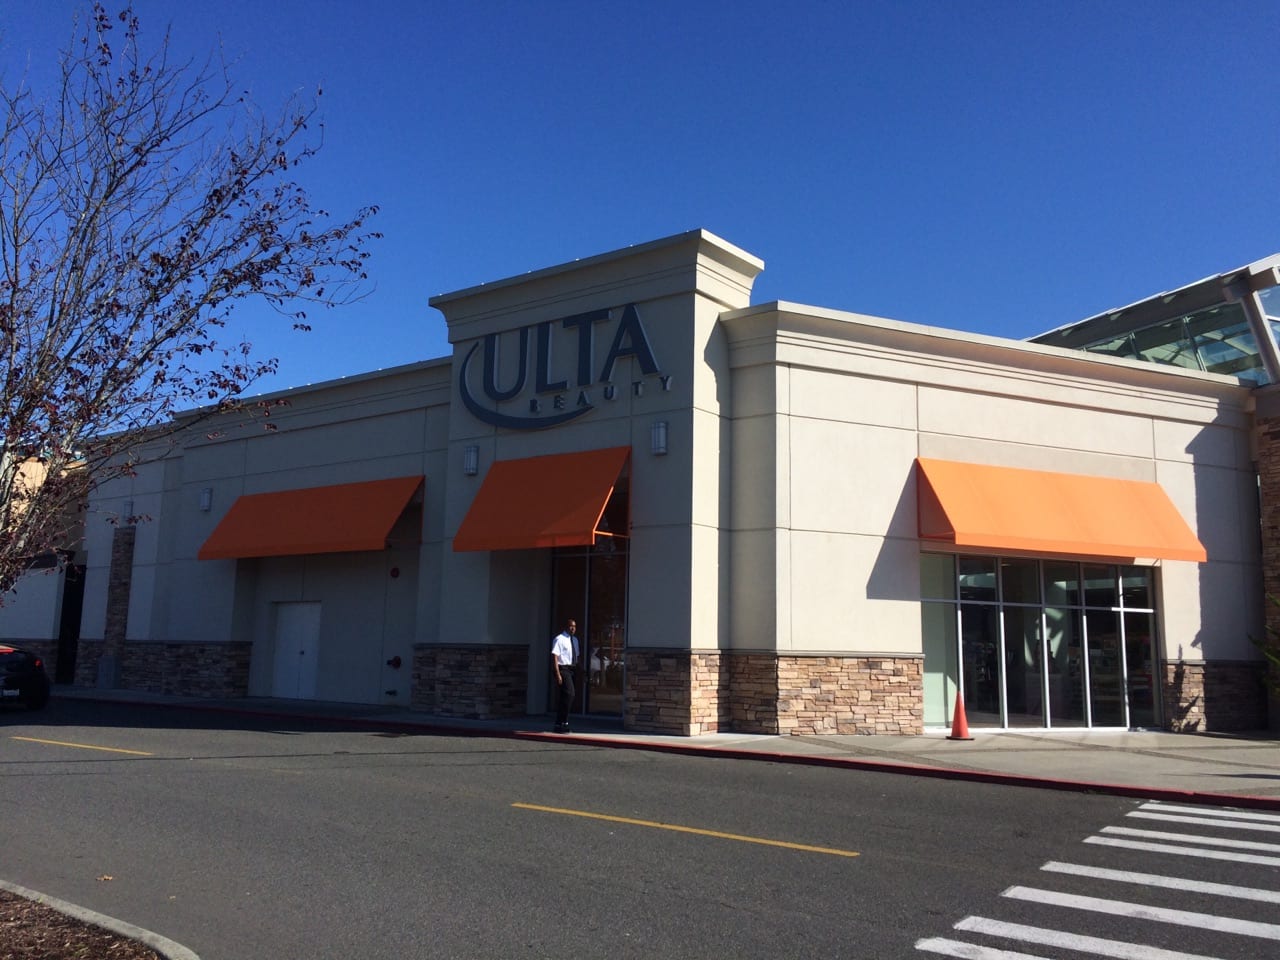 Ulta retail store with orange awnings attached to the building